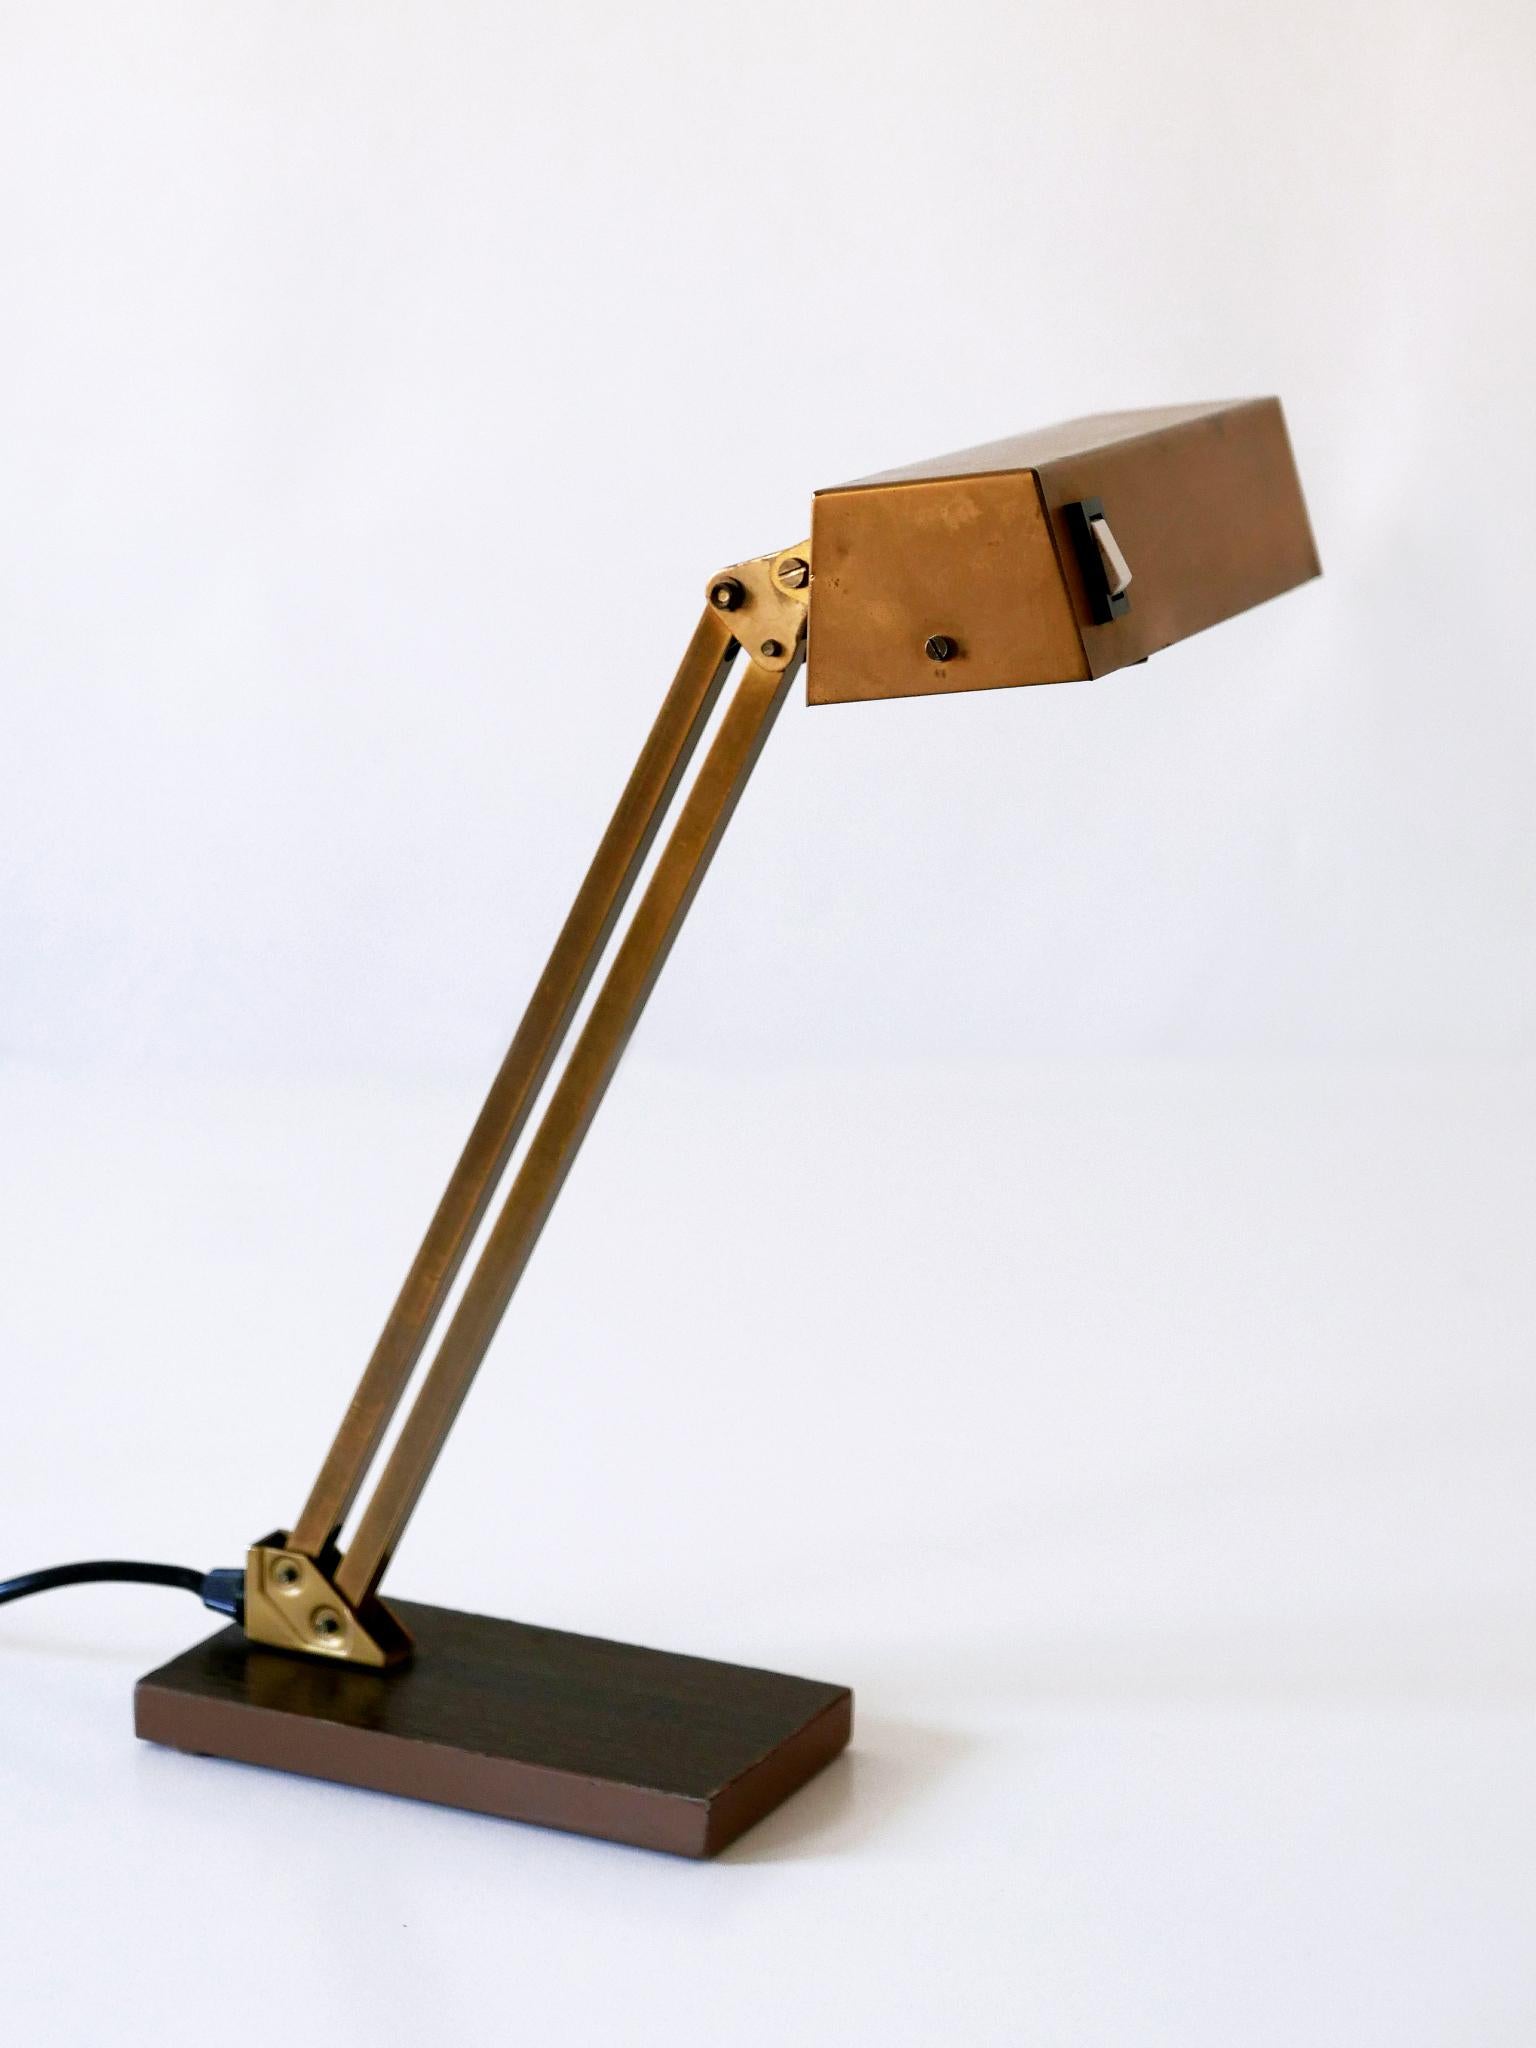 Elegant Mid-Century Modern piano lamp or desk light. Manufactured by Pfäffle Leuchten, 1960s, Germany. Adjustable height and shade.

Executed in brass, steel and cast iron, the piano lamp comes with 1 x E14 / E12 Edison screw fit bulb holder, is